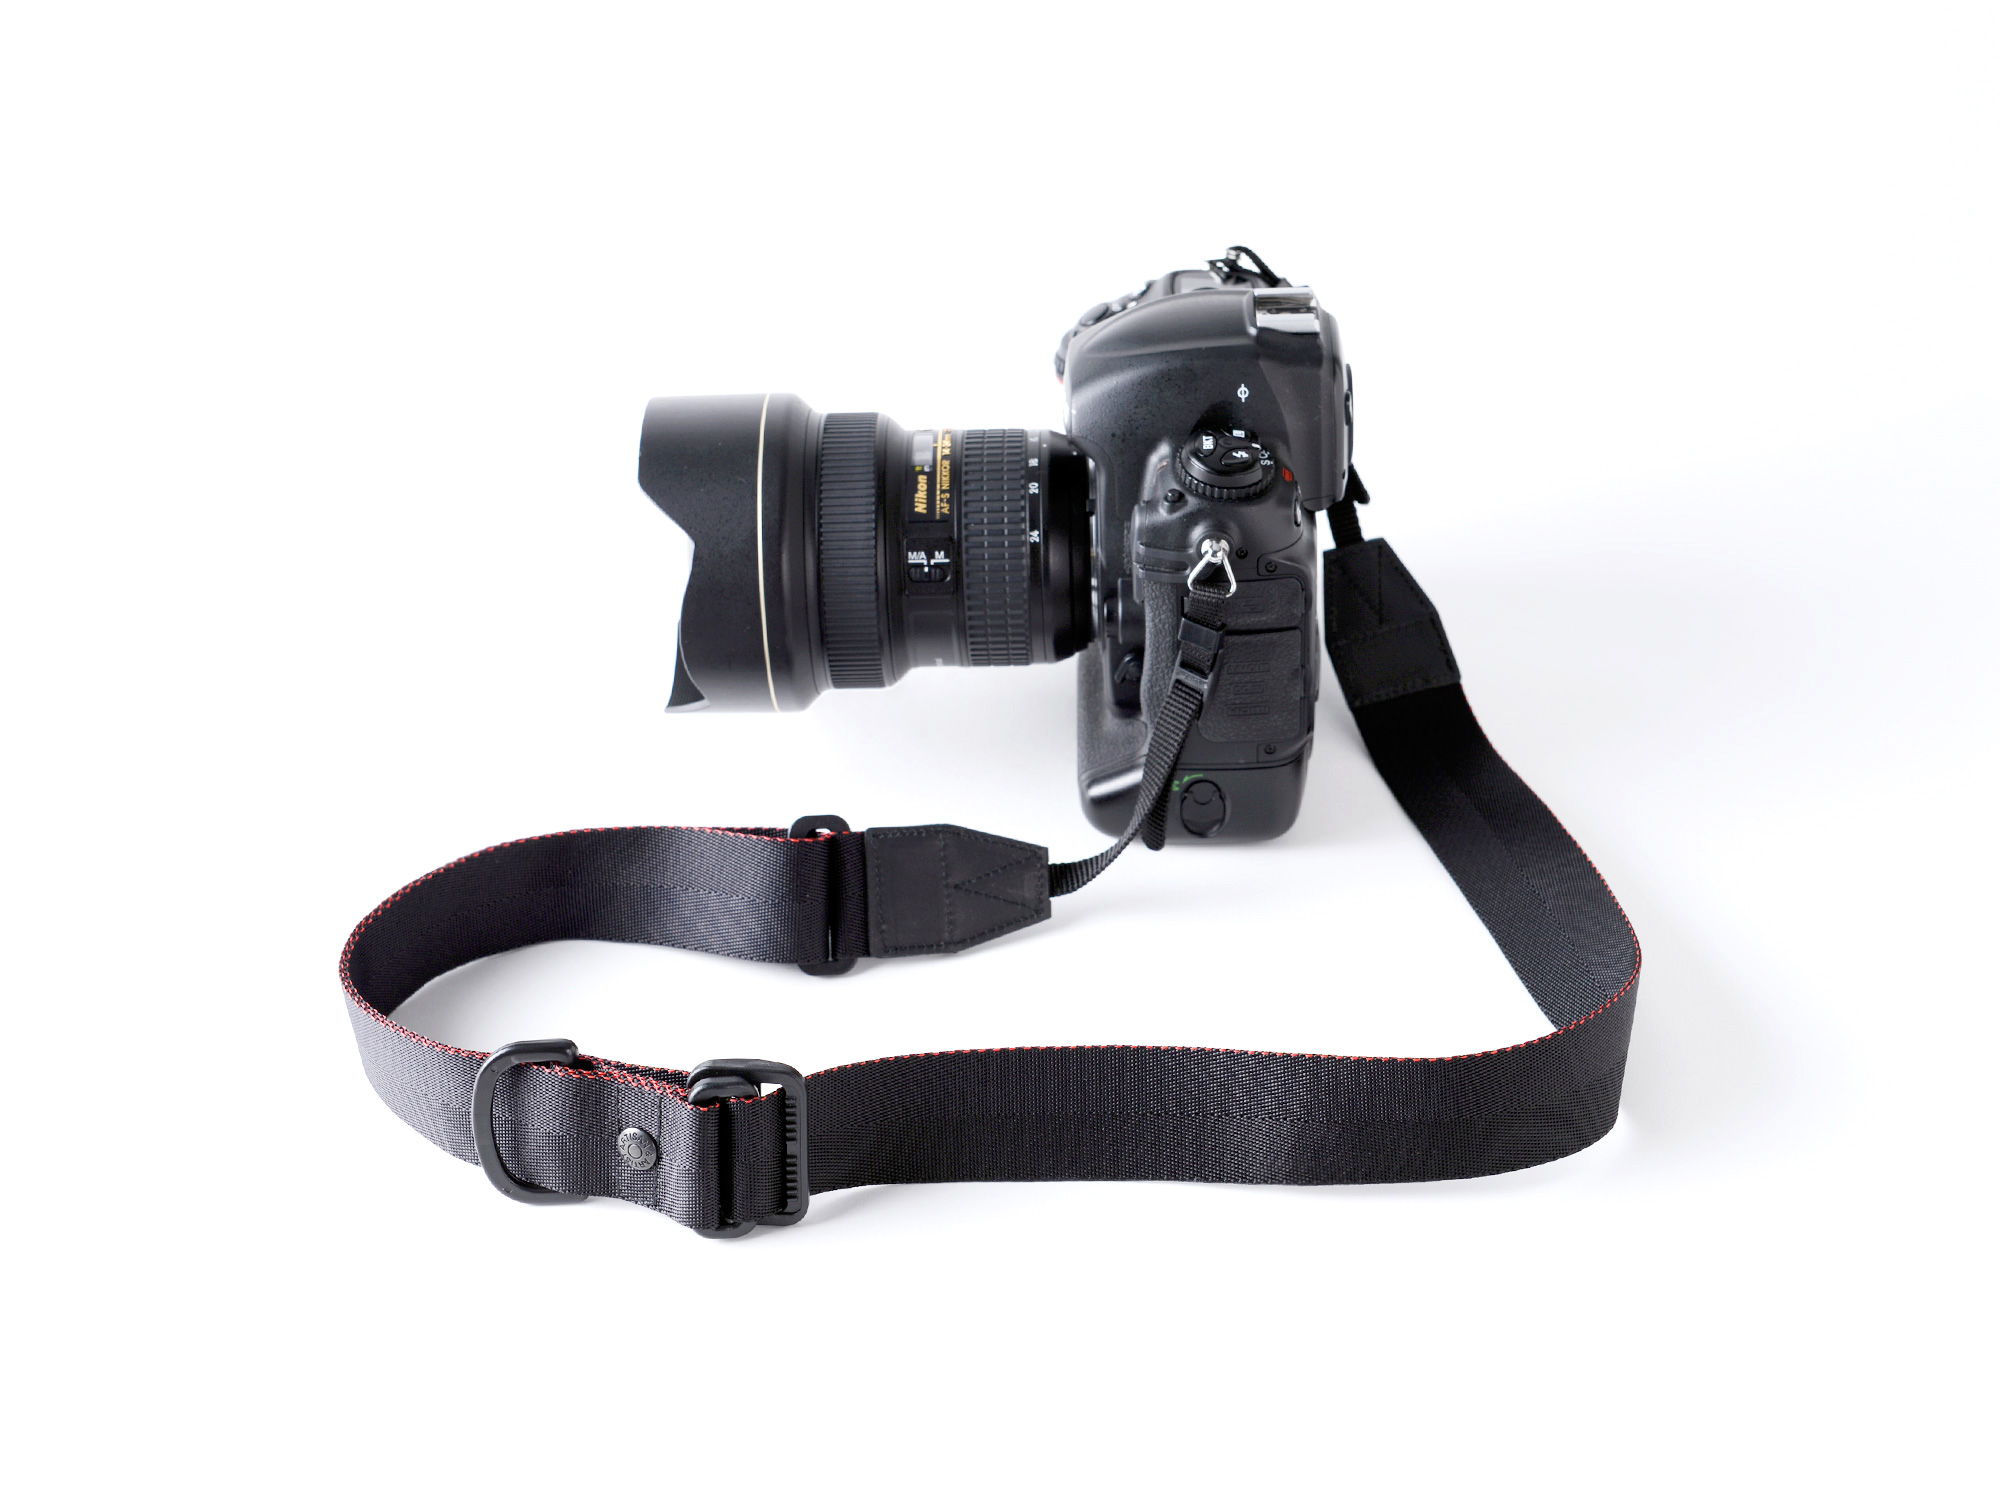 Established 1986<br />
The original camera strap born from the search for functionality and utility